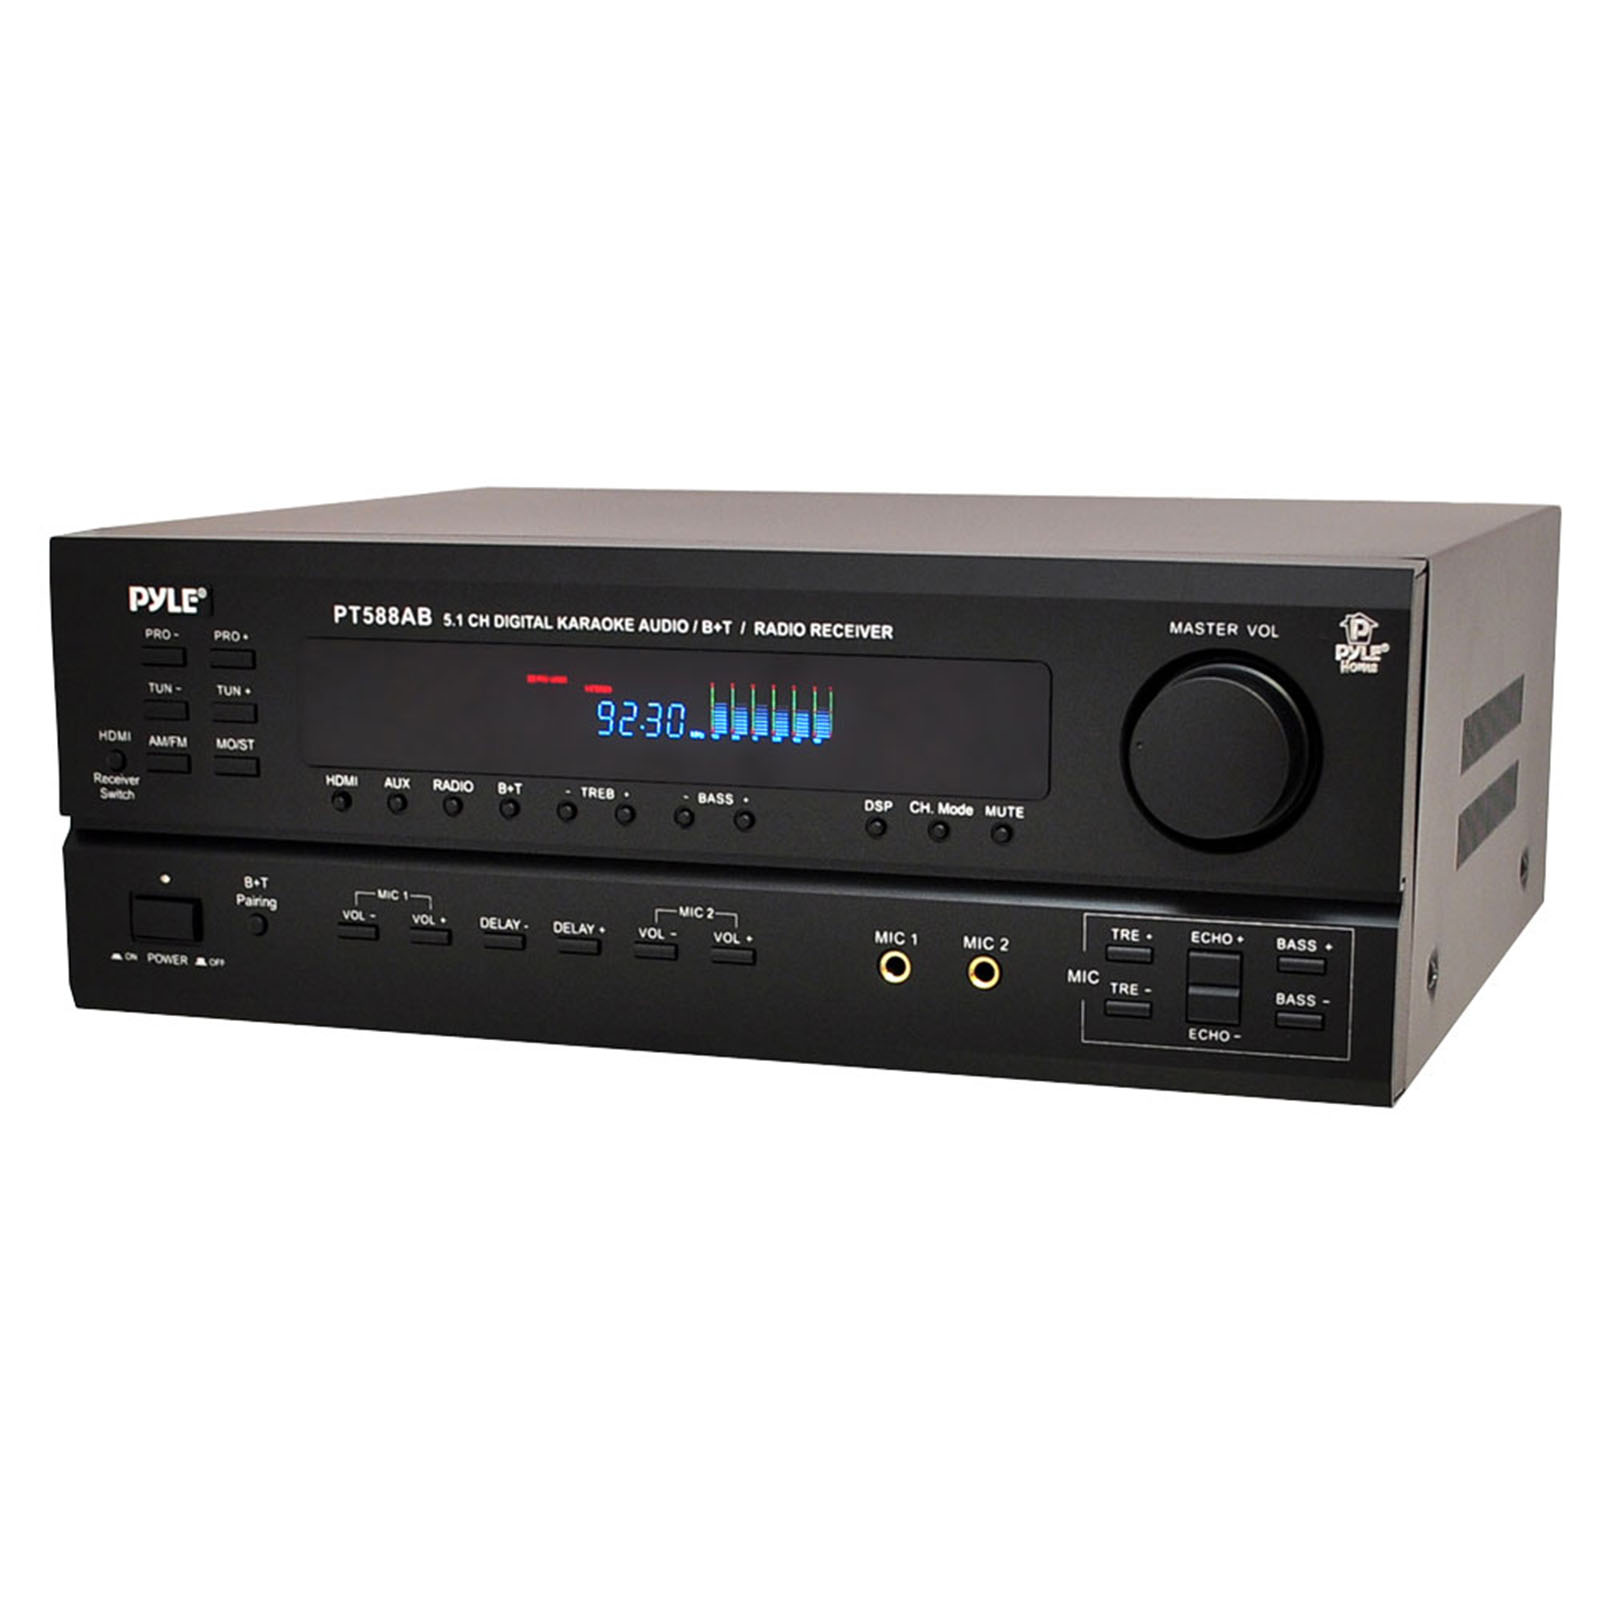 PYLE PT588AB 5.1 Channel 420 Watt Home Audio Receiver Amplifier with Bluetooth - image 2 of 5